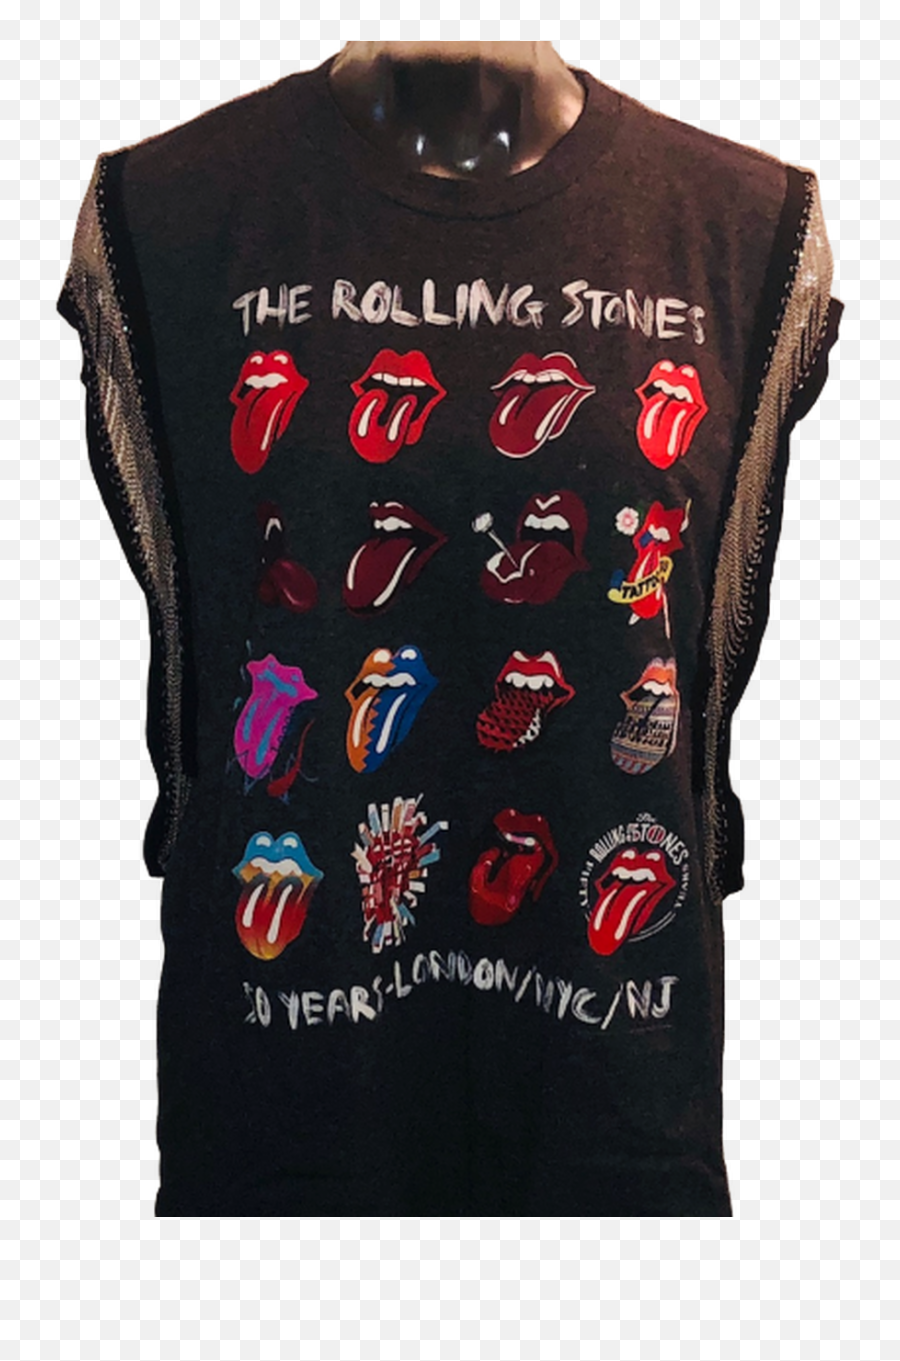 Rolling Stones Vintage Sleeveless Fashion T - Shirt By Trendy And Tipsy Tongue Logos 50 Years Ny Nj London Gray Tank Top Shirt Emoji,Face With Stuck-out Tongue & Winking Eye Emoticon